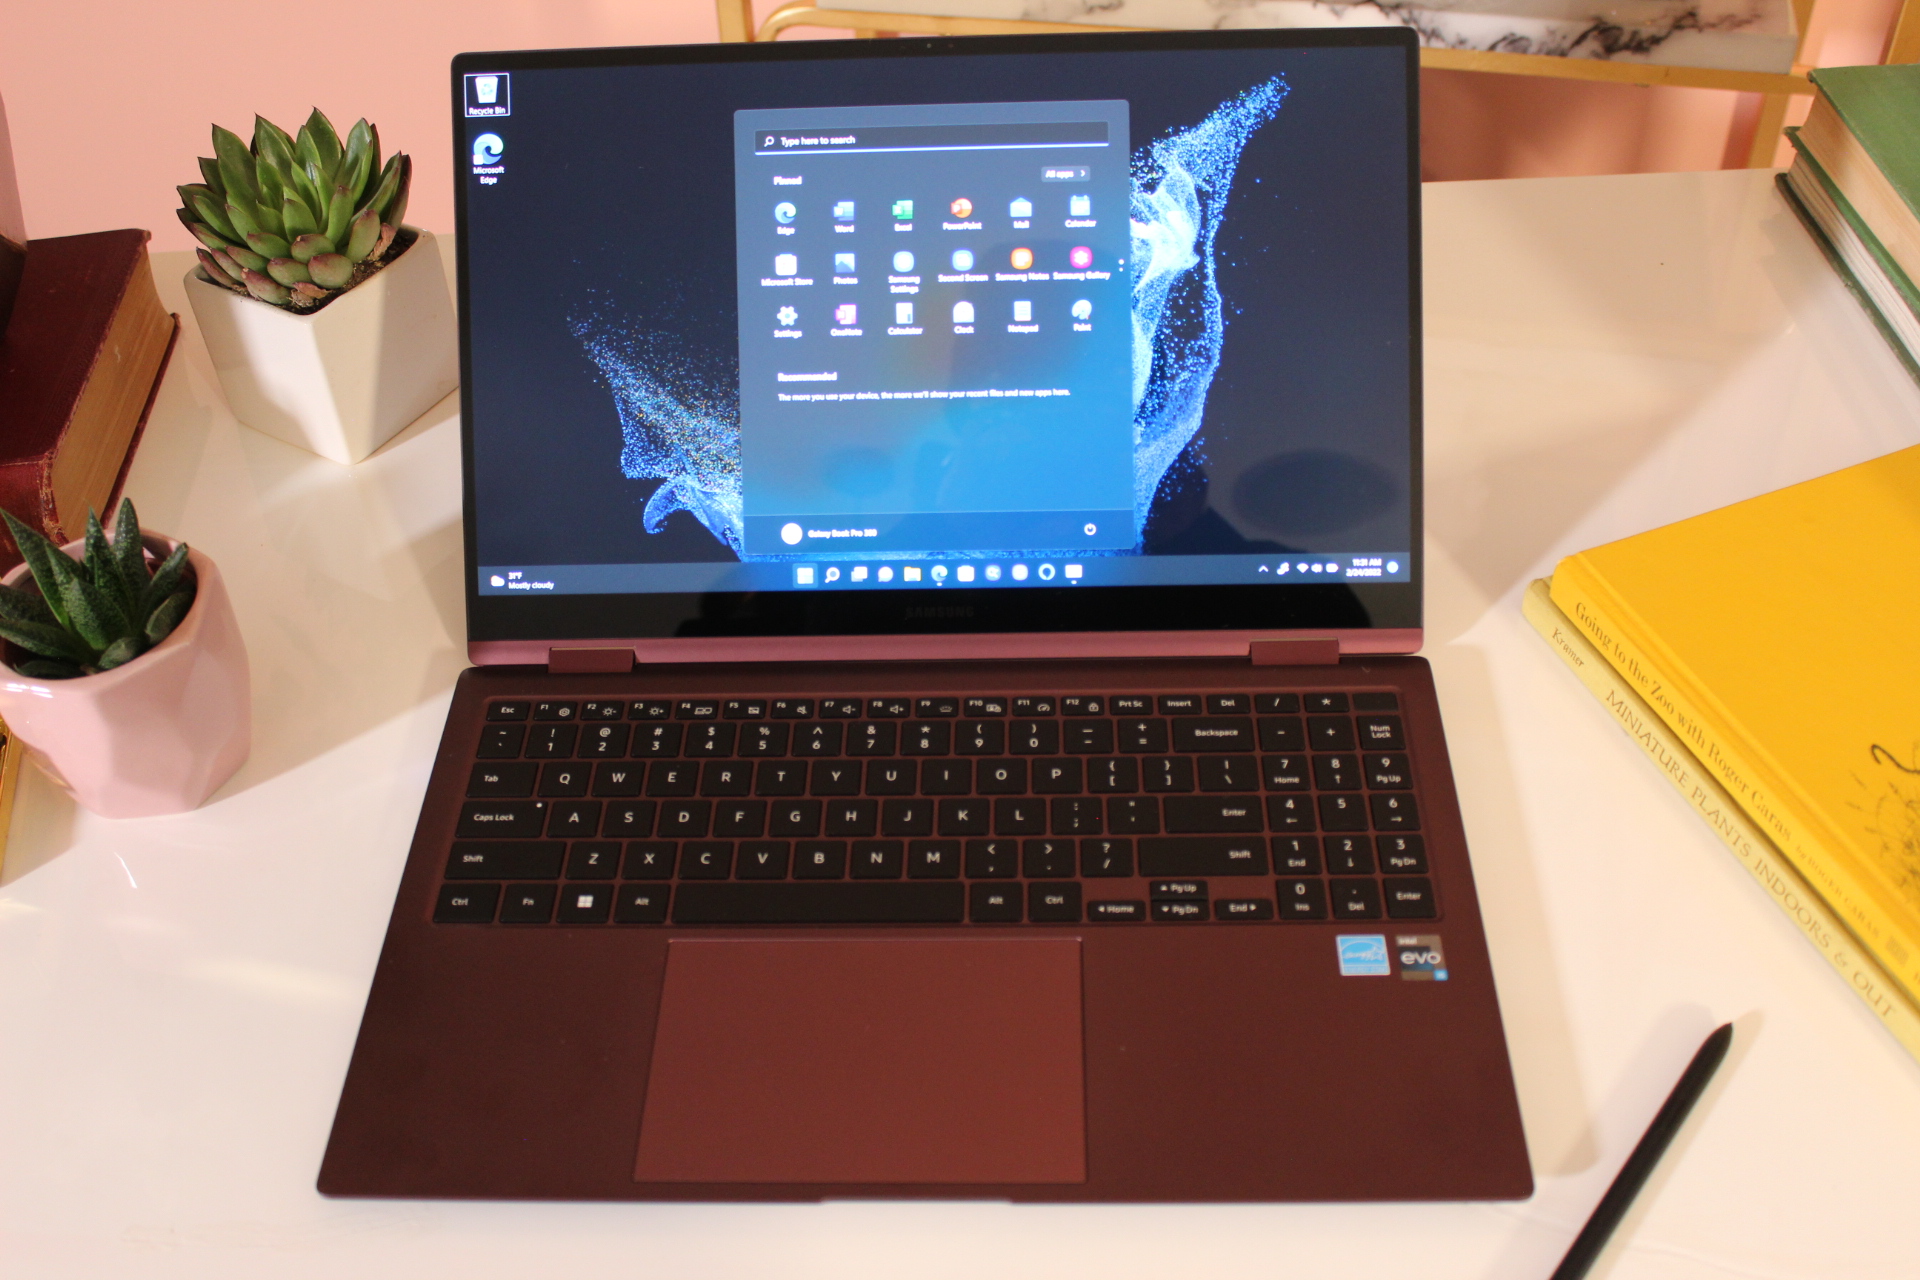 Samsung Galaxy Book 2 Pro 360 hands-on review: A sturdy sequel